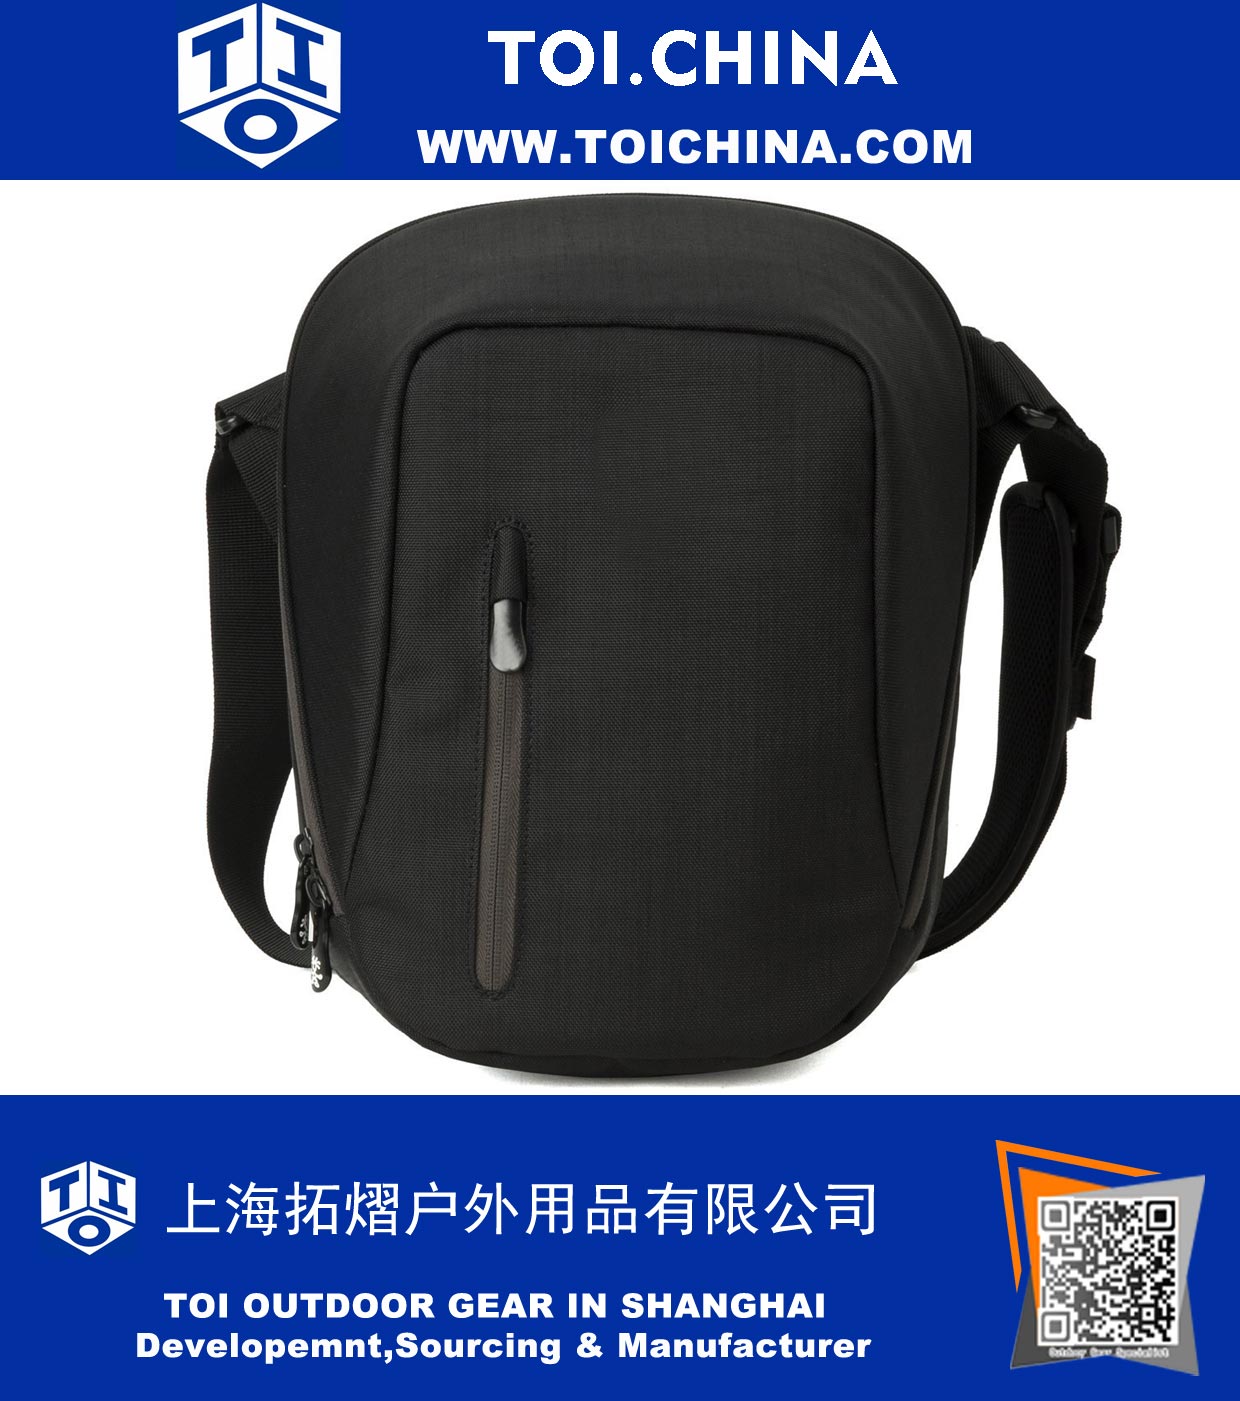 Camera Bag with iPad Compartment